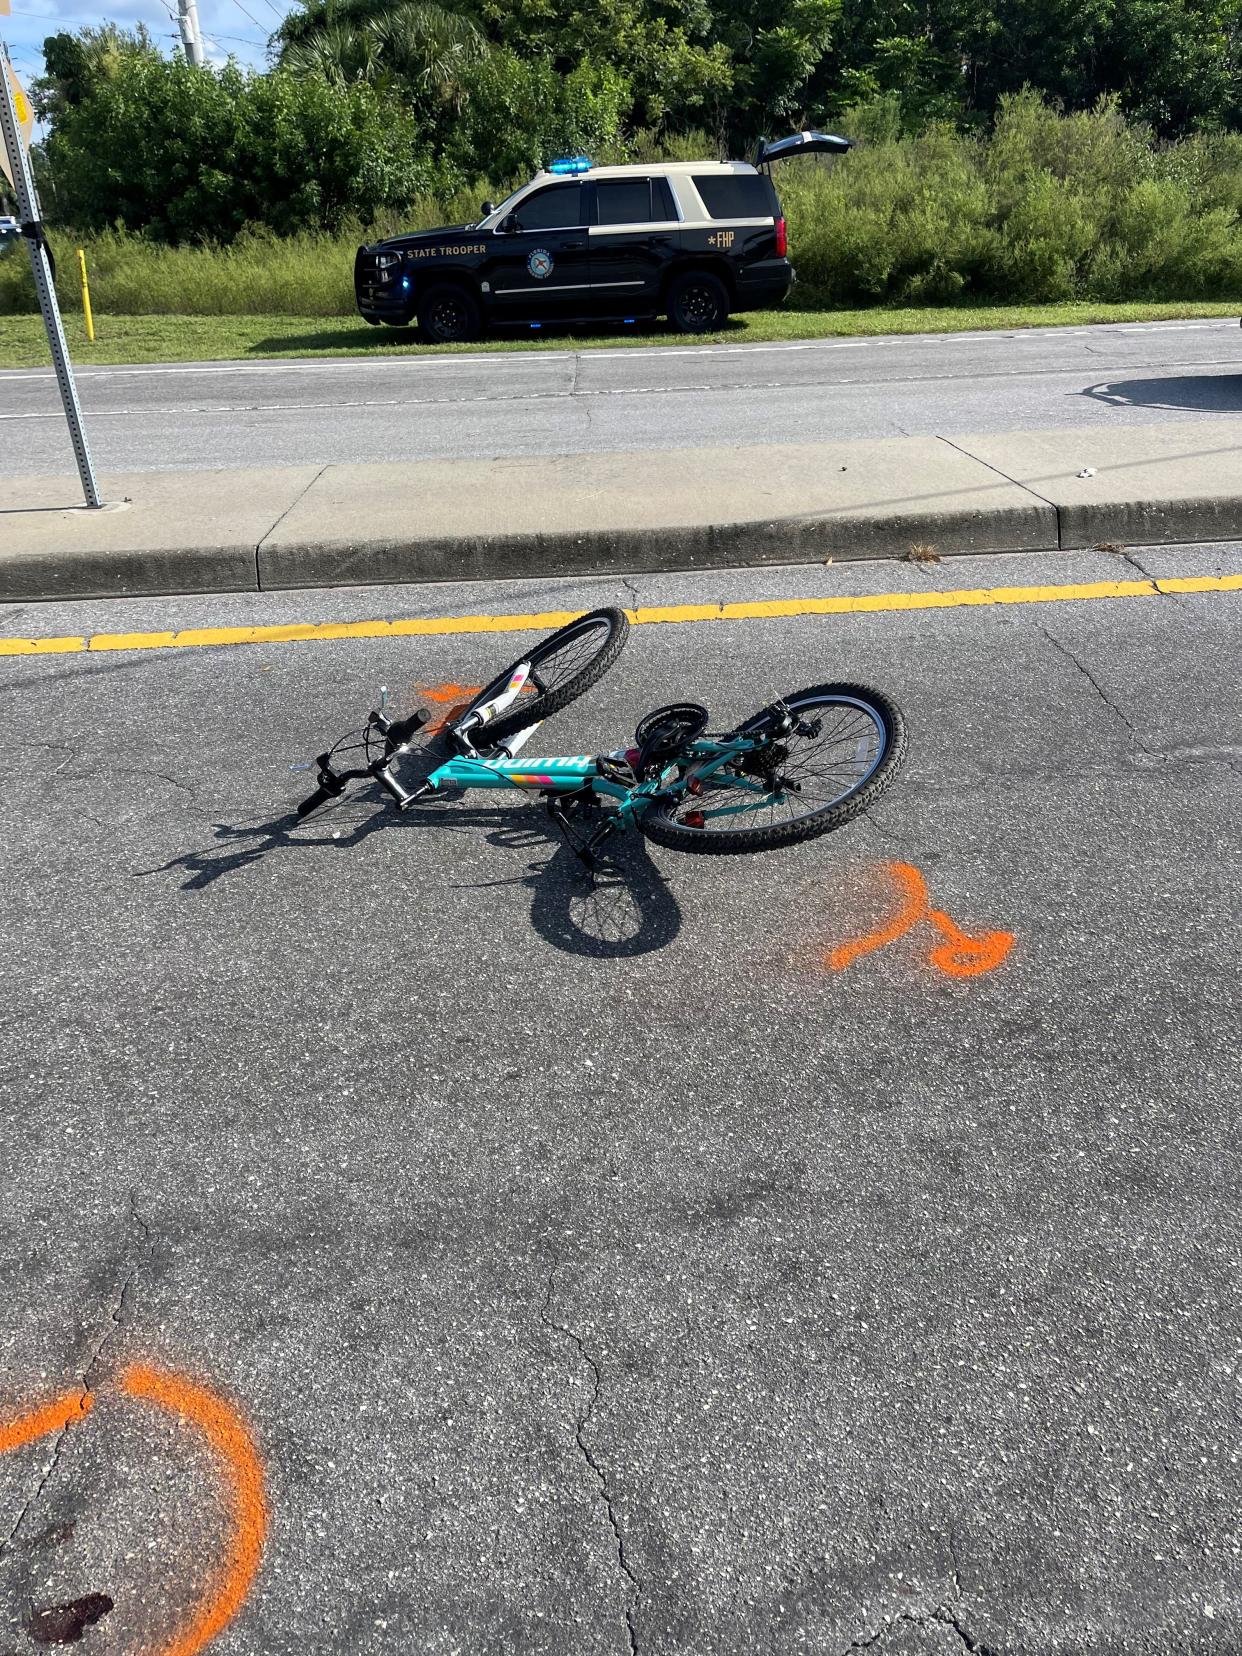 The girl was bicycling on a crosswalk at the intersection of East Bay Street and Old Venice Road near Pine View School in Osprey.